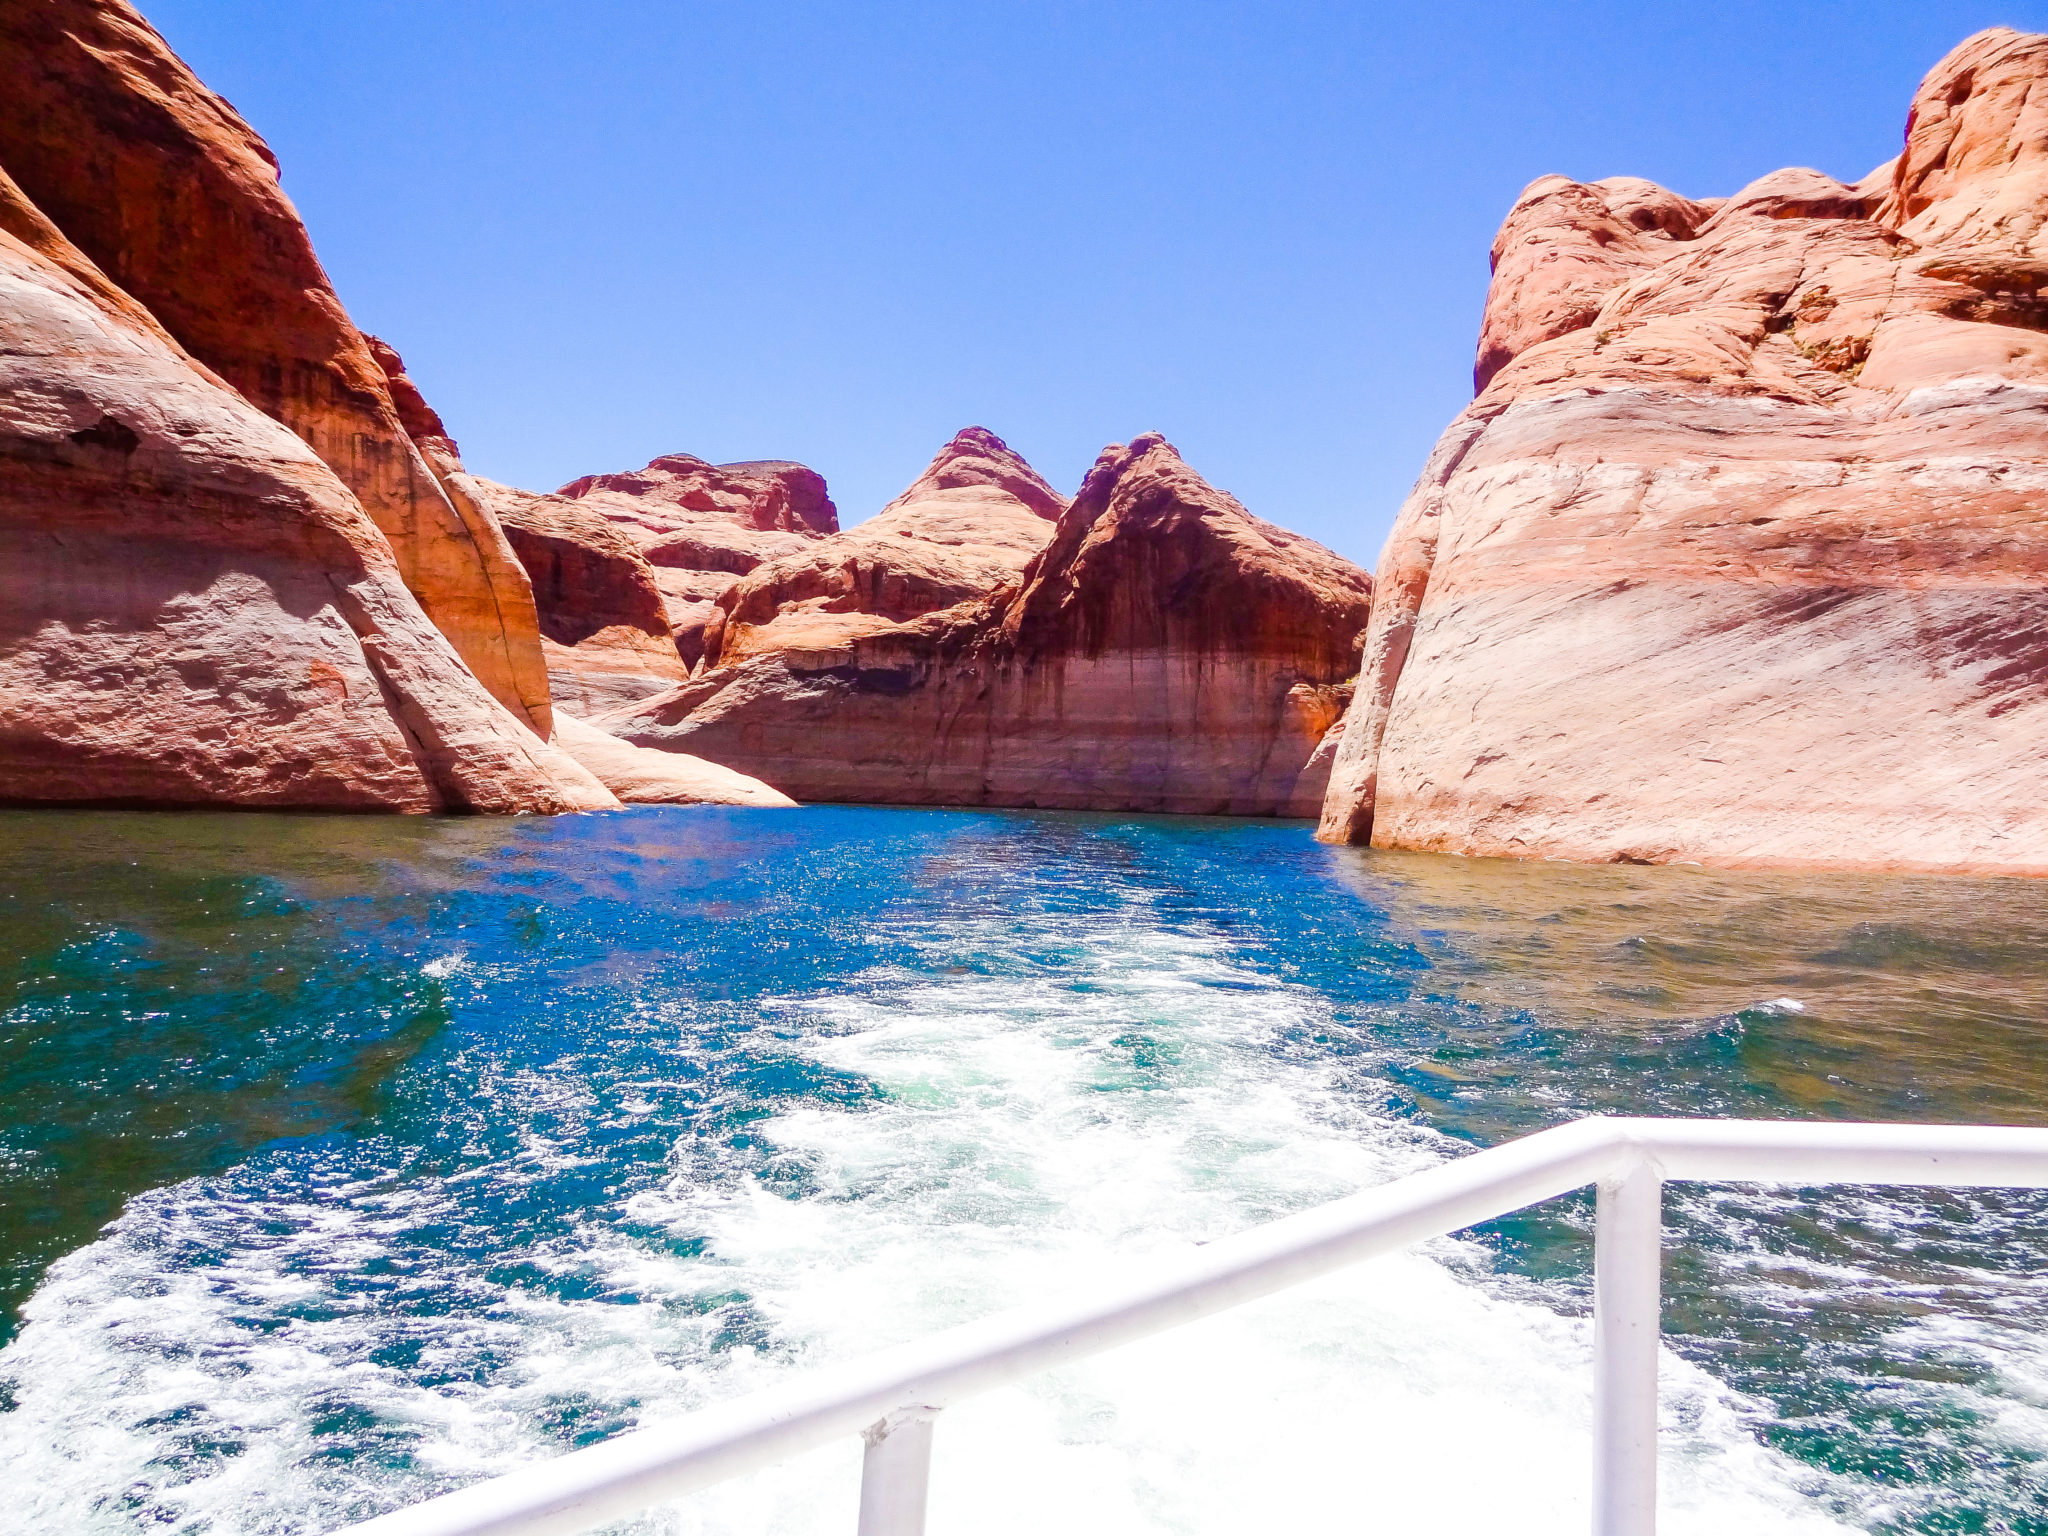 A view from the cruise boat in the lovely Lake Powell. This is part of the Glen Canyon National Recreation Area in Page, AZ.